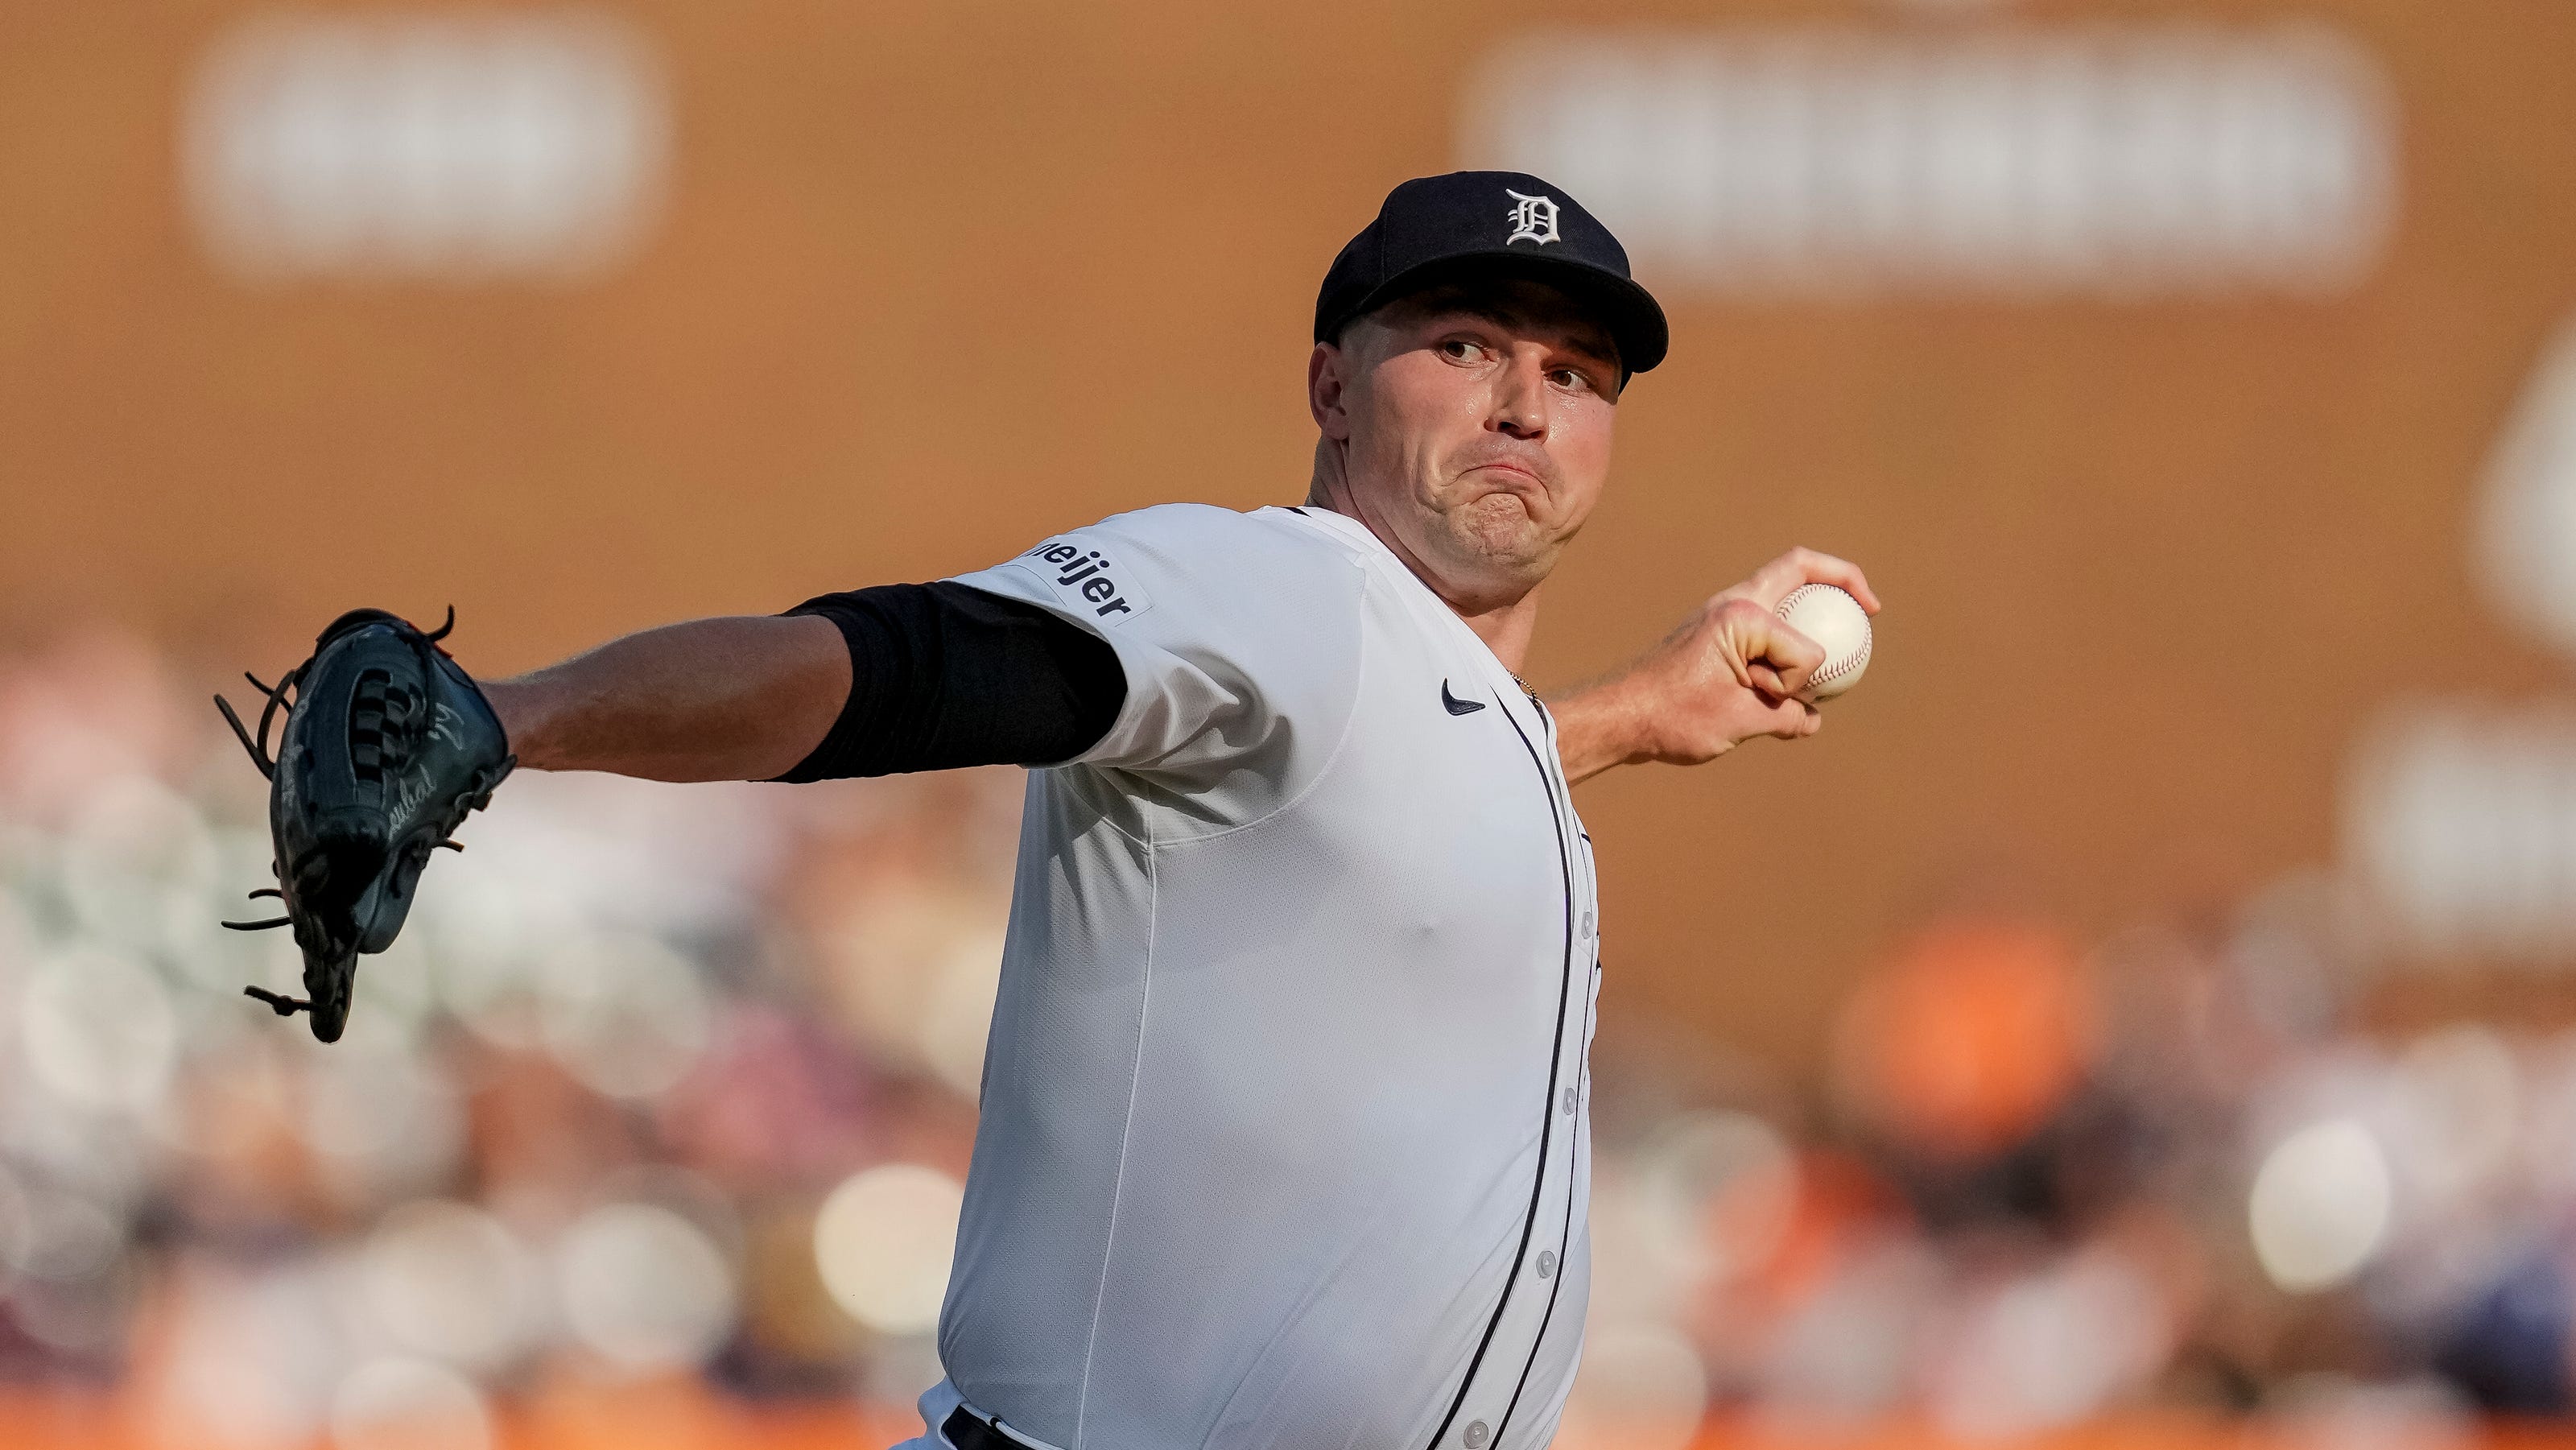 Detroit Tigers lineup vs. Kansas City Royals: What time, TV channel is tonight's game on?